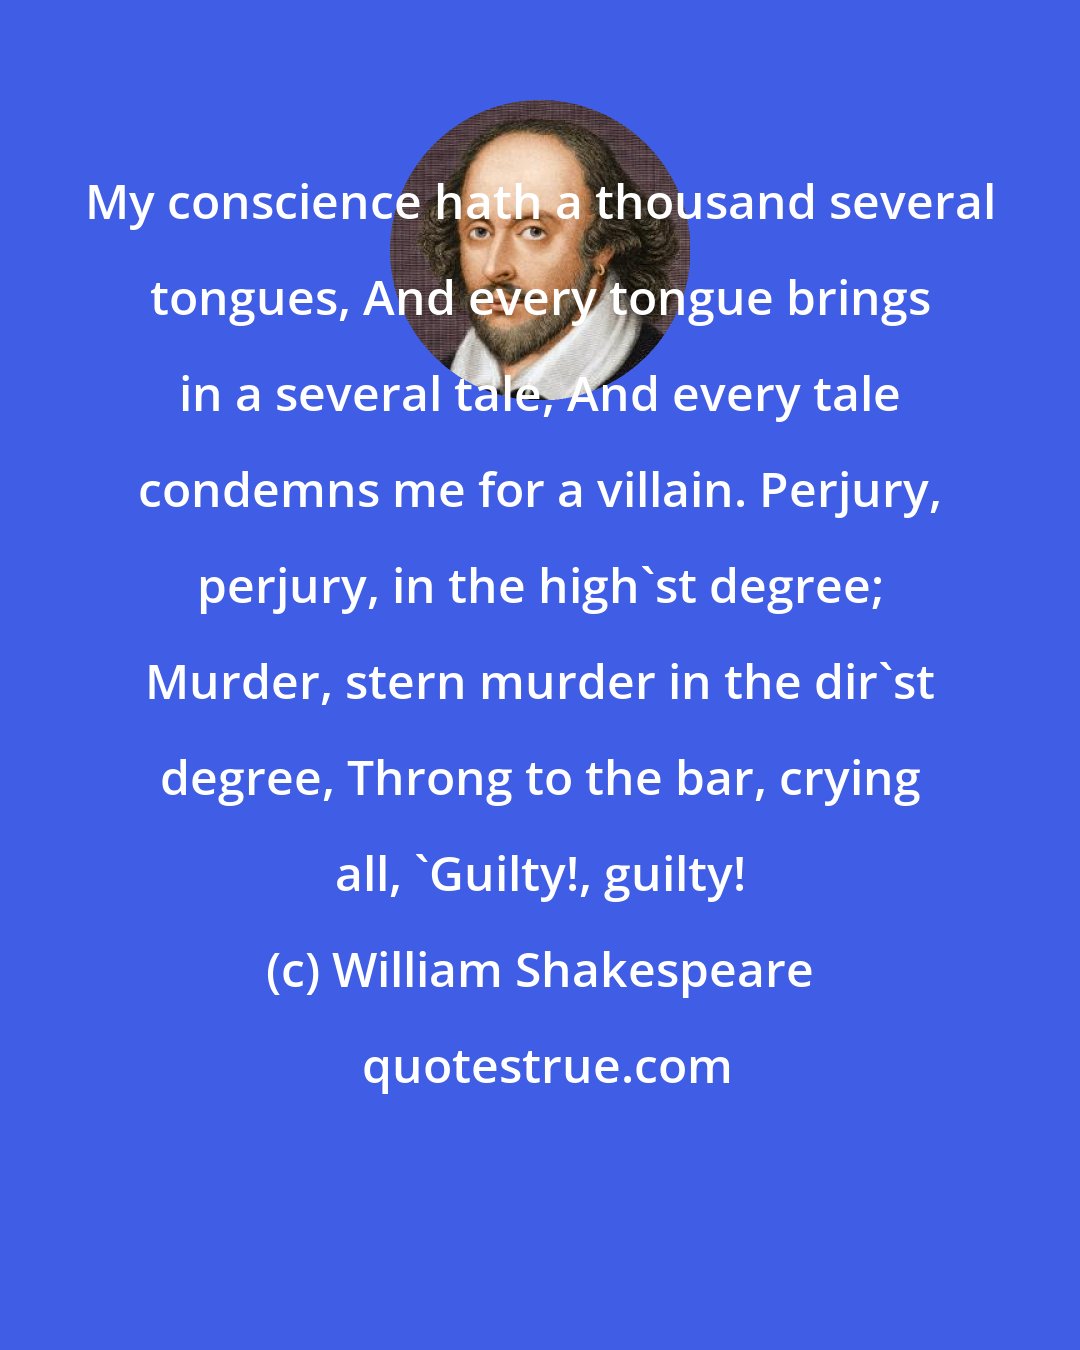 William Shakespeare: My conscience hath a thousand several tongues, And every tongue brings in a several tale, And every tale condemns me for a villain. Perjury, perjury, in the high'st degree; Murder, stern murder in the dir'st degree, Throng to the bar, crying all, 'Guilty!, guilty!